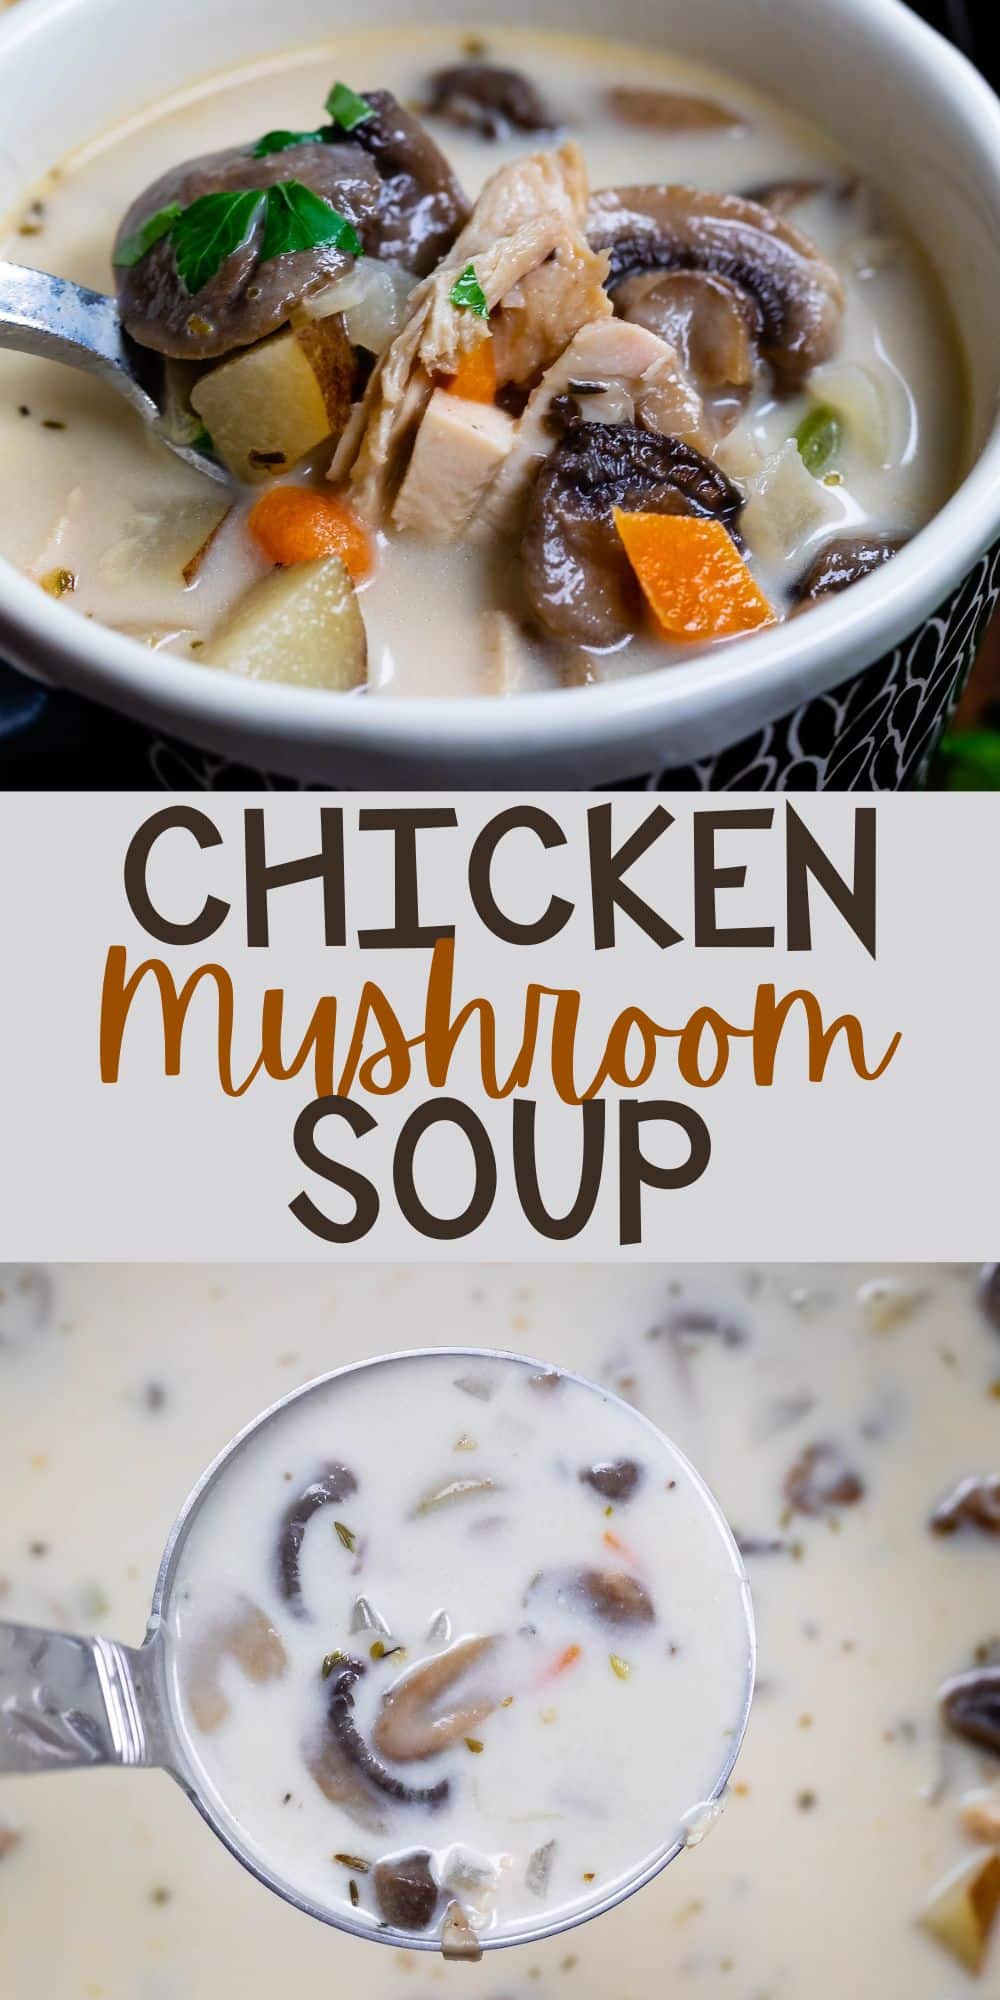 two photos of soup with mushrooms in it in a dark blue bowl with a spoon inside with words on the image.